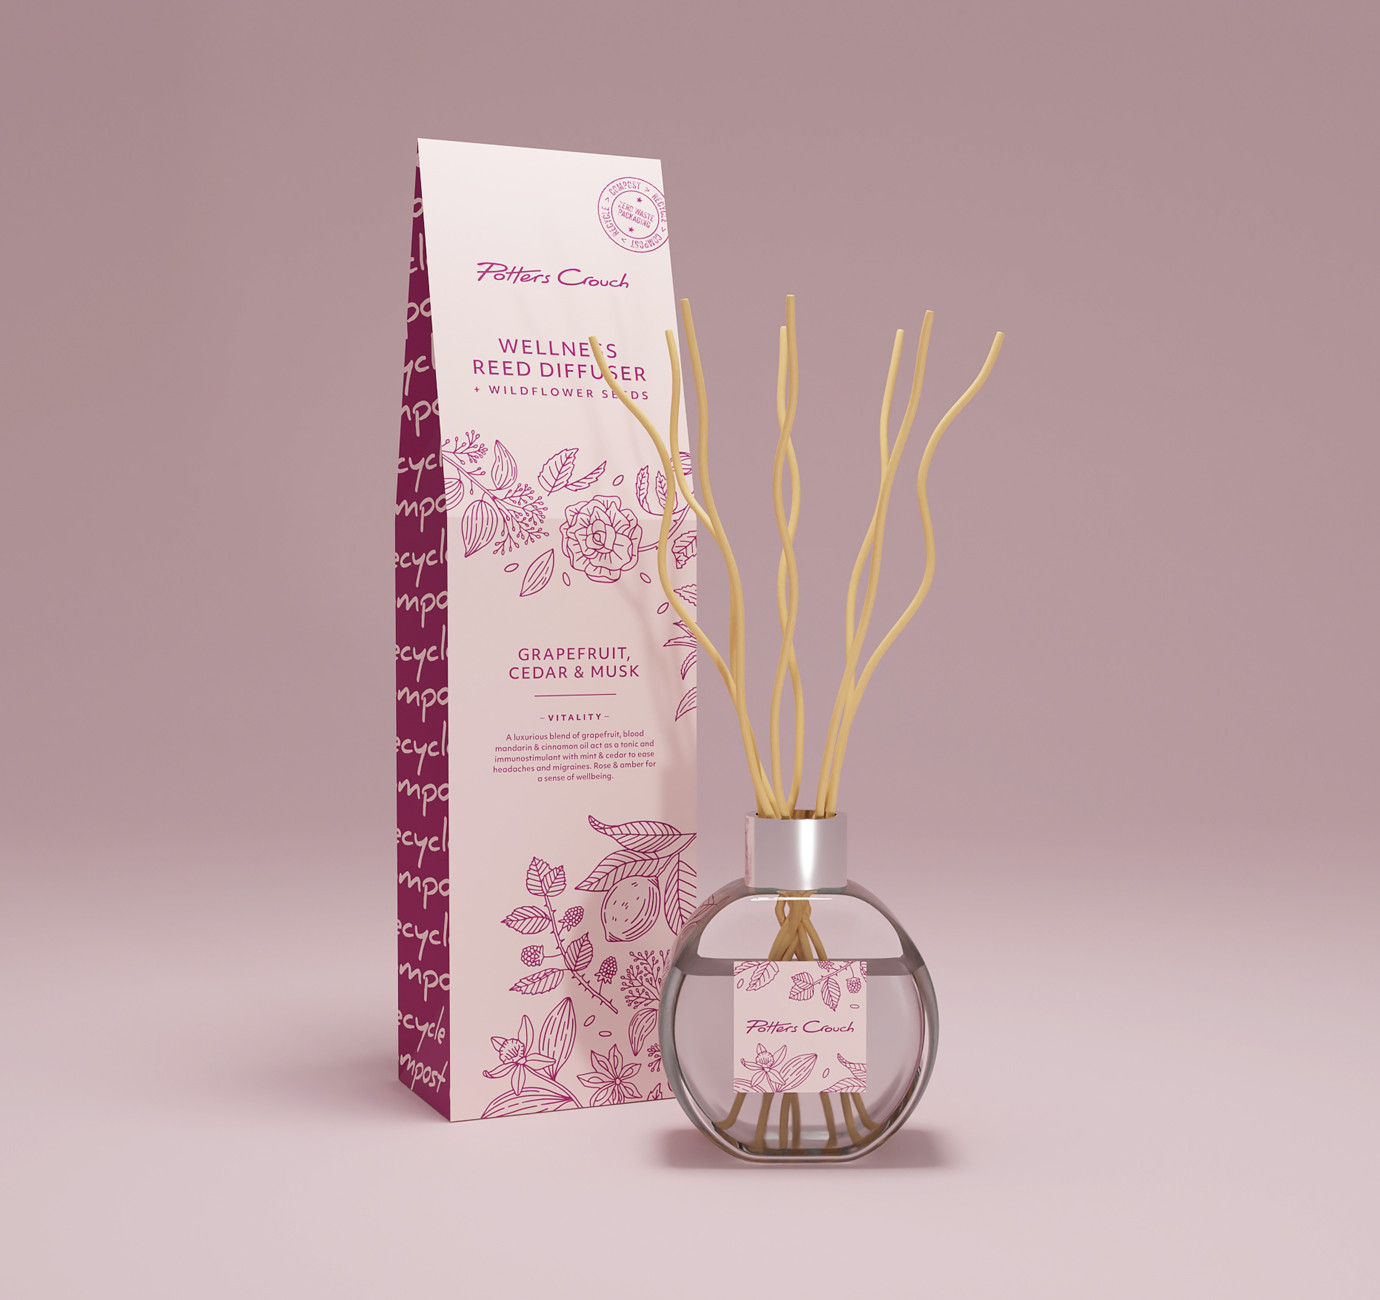 Potters Crouch reed diffuser packaging design by Root Studio